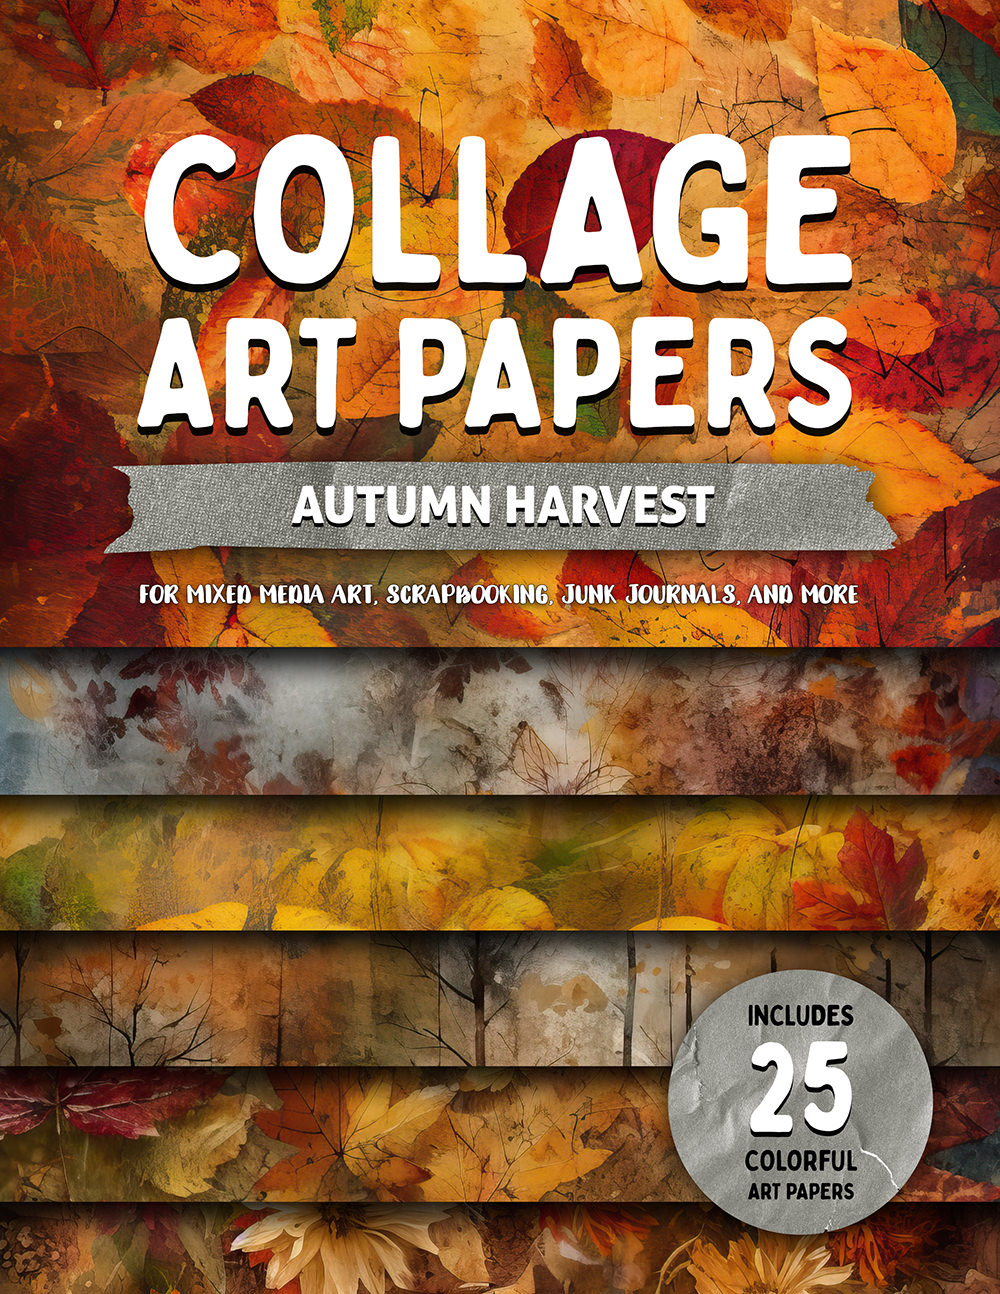 Collage Art Papers: Autumn Harvest